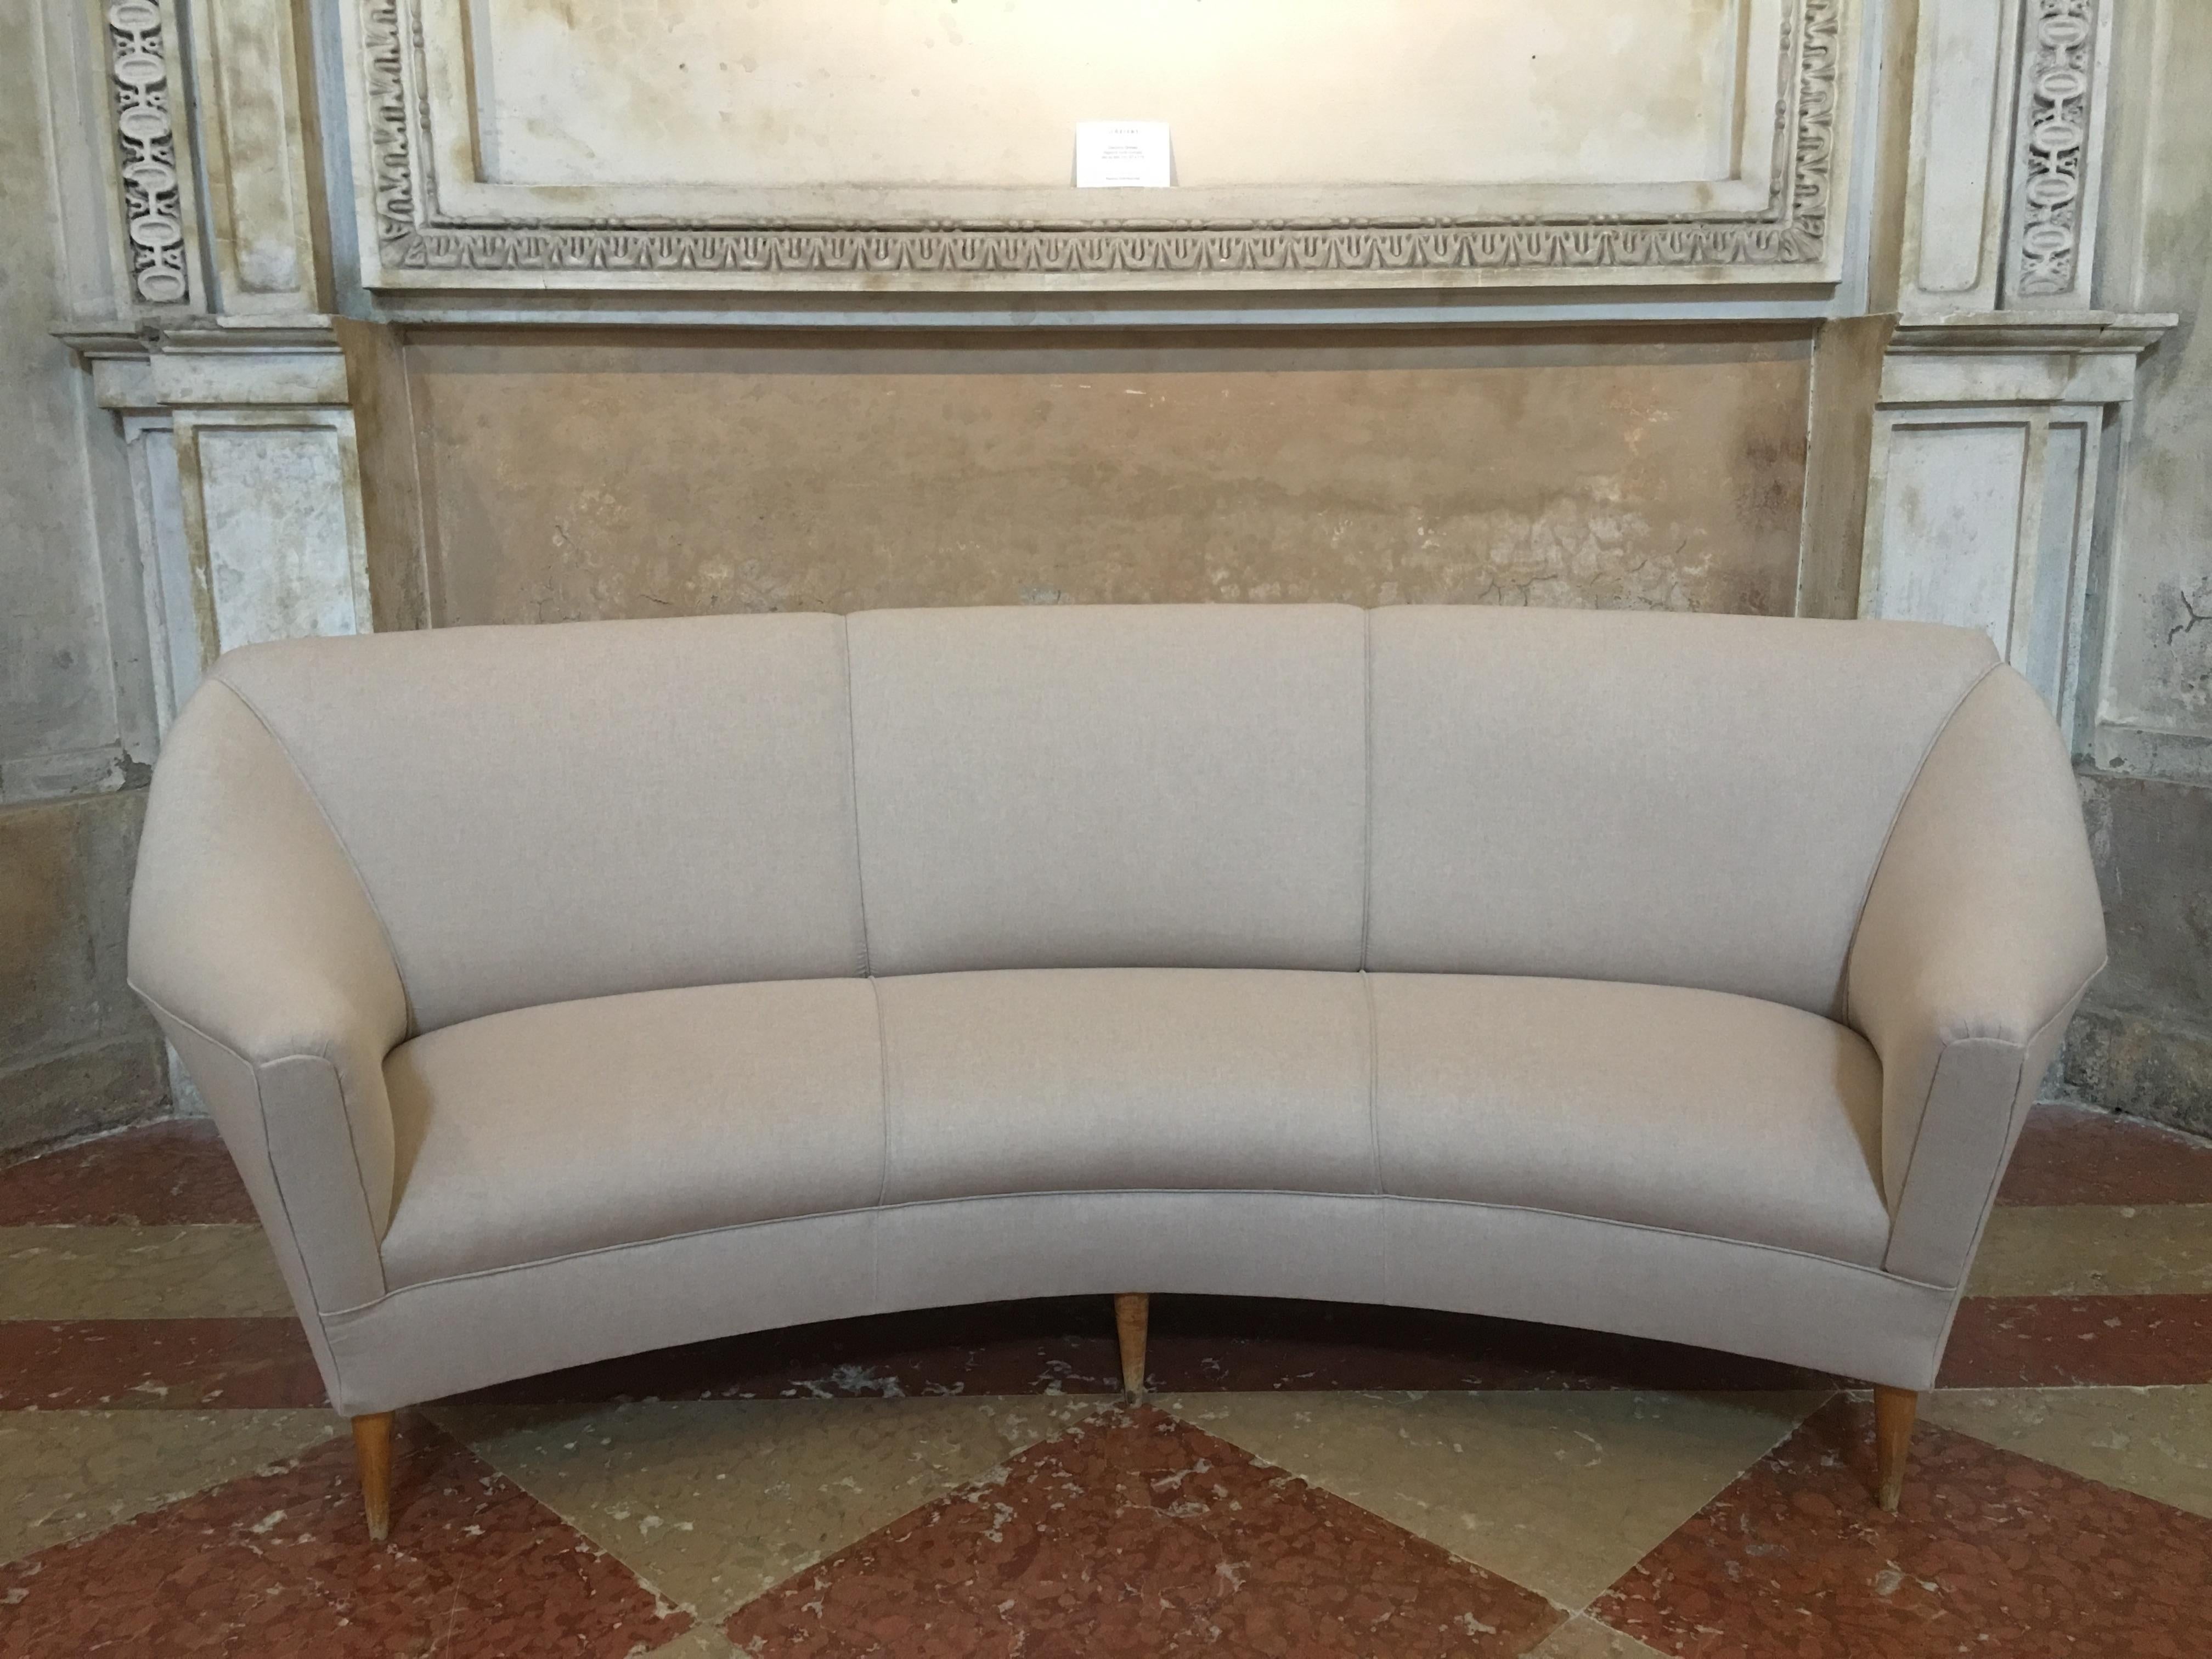 Iconic curved sofa and pair of armchairs designed by Ico Parisi for Ariberto Colombo.
Very elegant and comfortable newly reupholstered in cotton and linen fabric.
Wood legs.
Armchairs measures: W 84, D 83, H 88\40 armchairs ON HOLD

Lit. Wright, lot